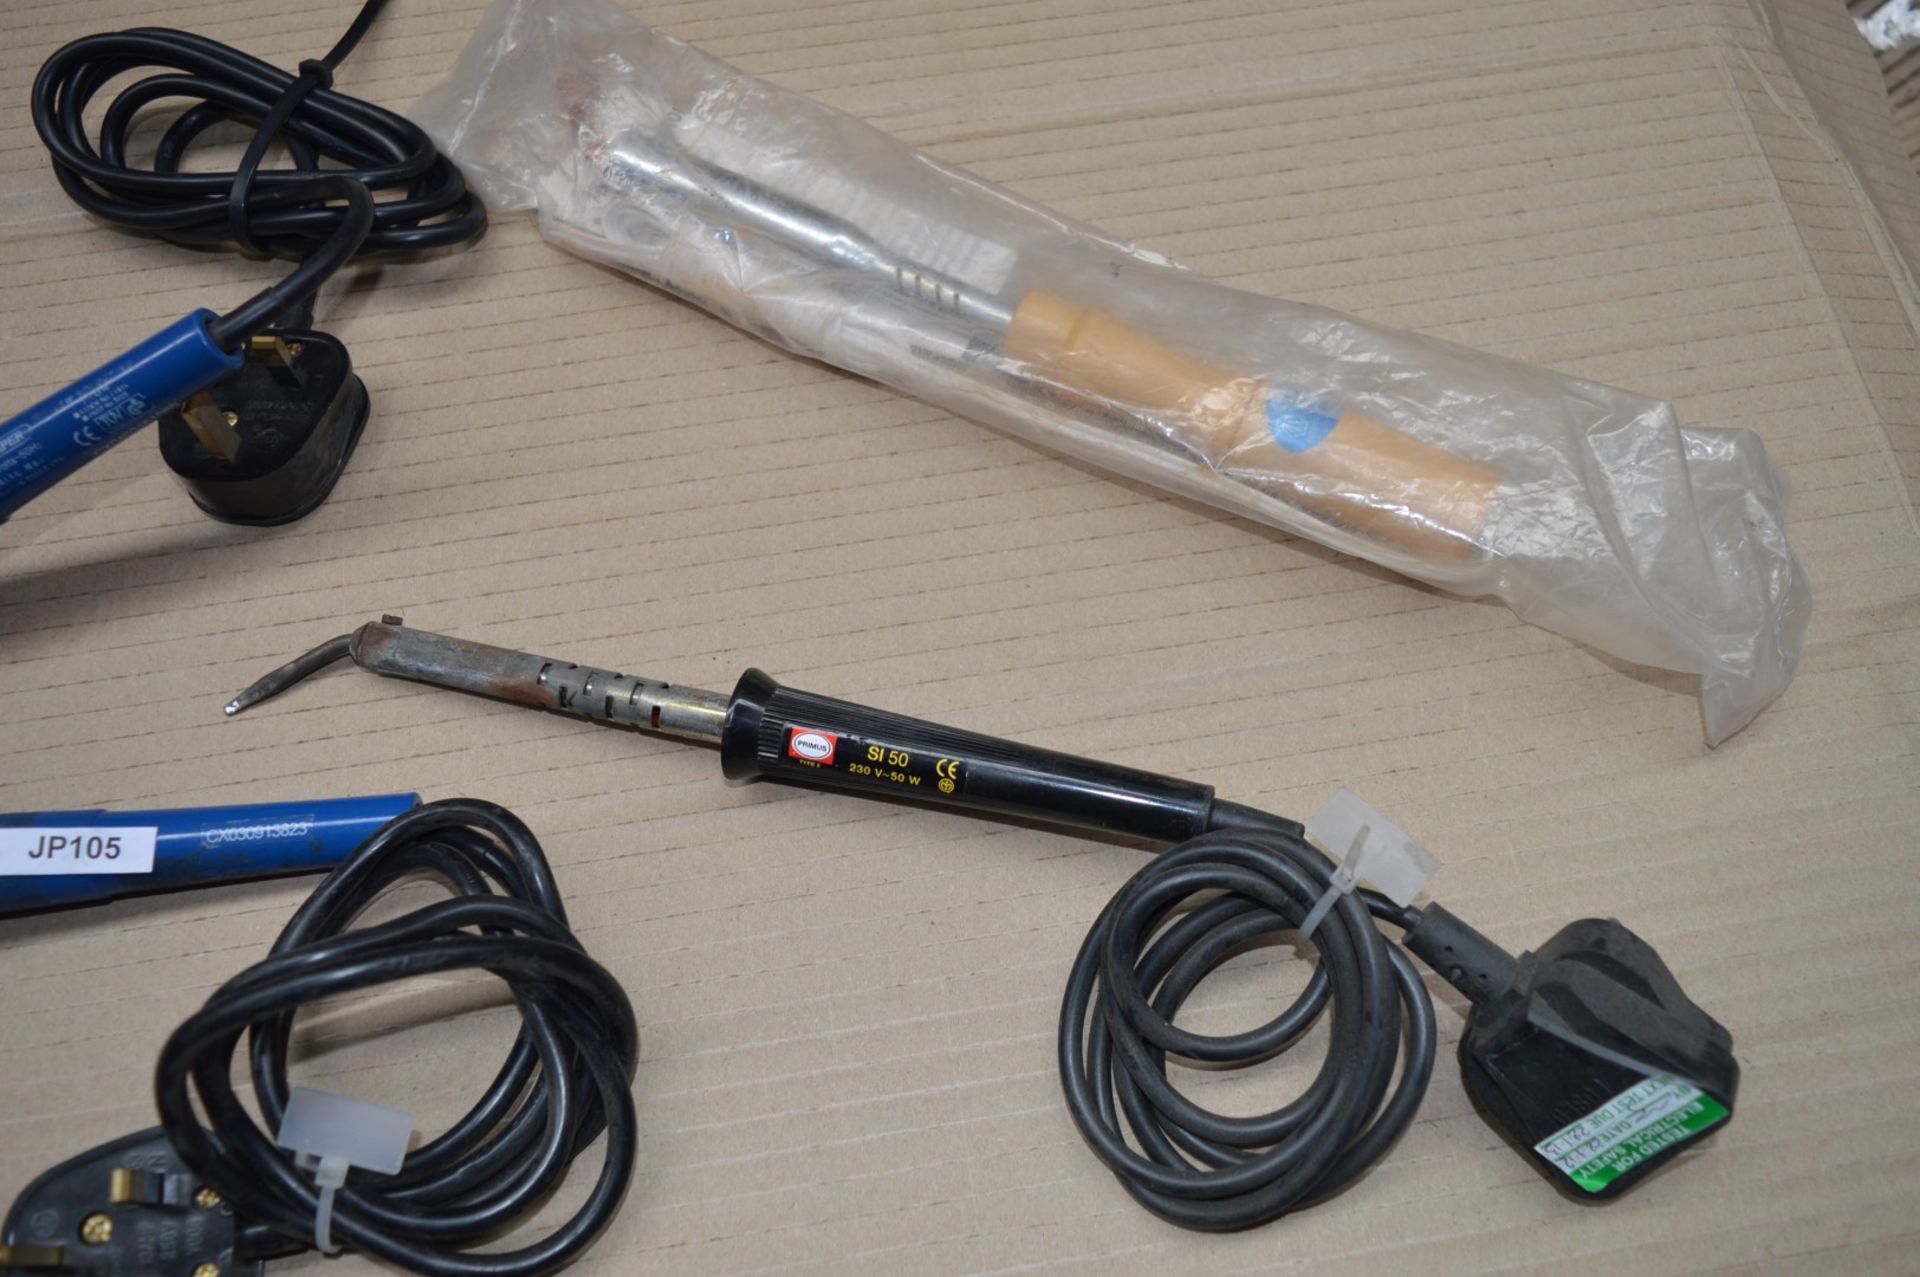 6 x Various 240v Soldering Irons - Brands Include Weller and Draper - CL300 - Ref JP105 - - Image 19 of 22